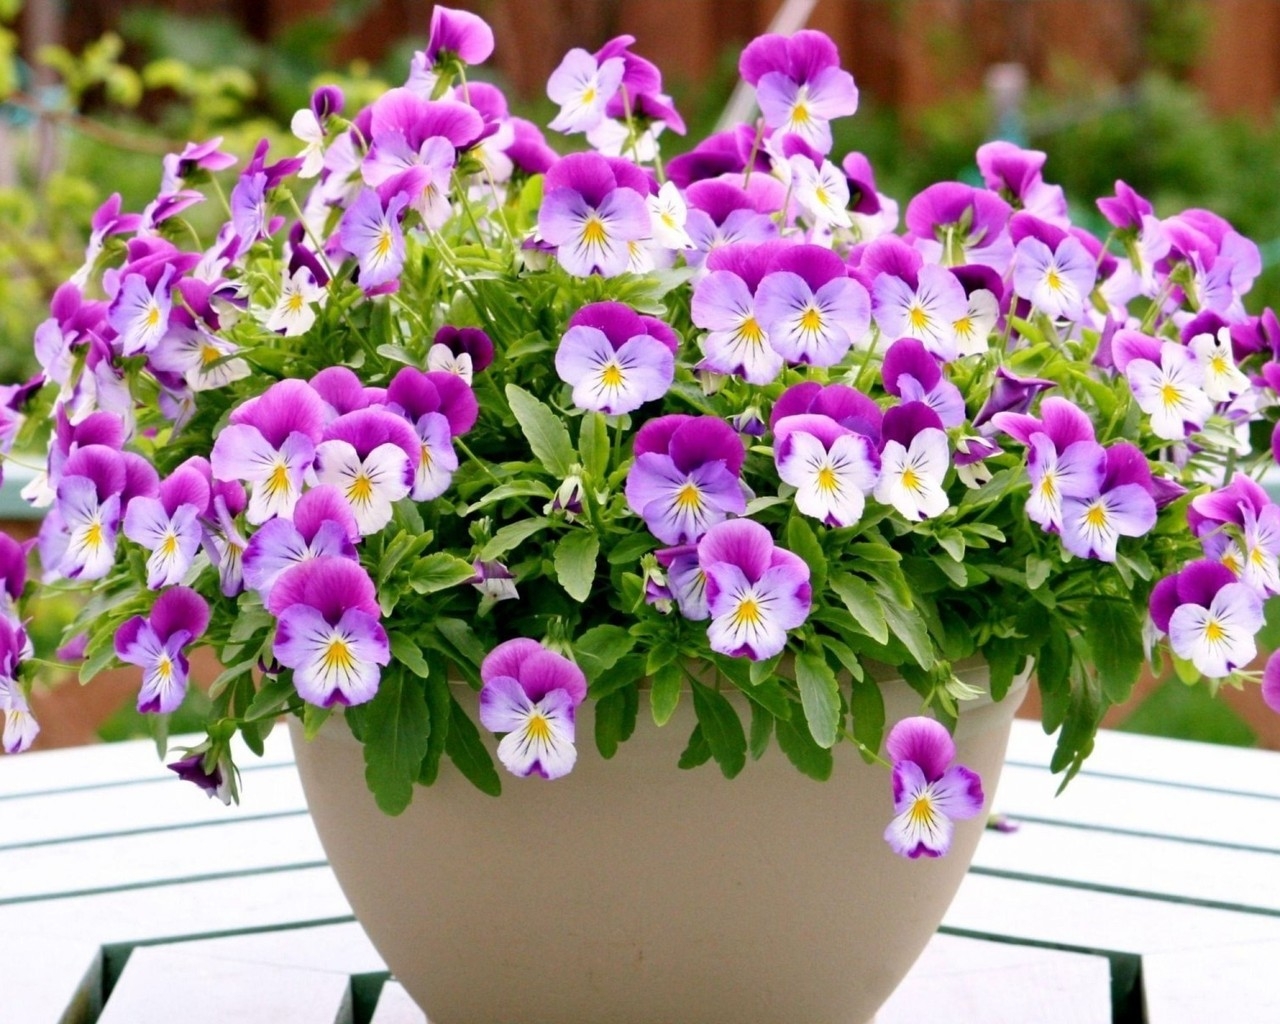 Pansies in a Vase  for 1280 x 1024 resolution